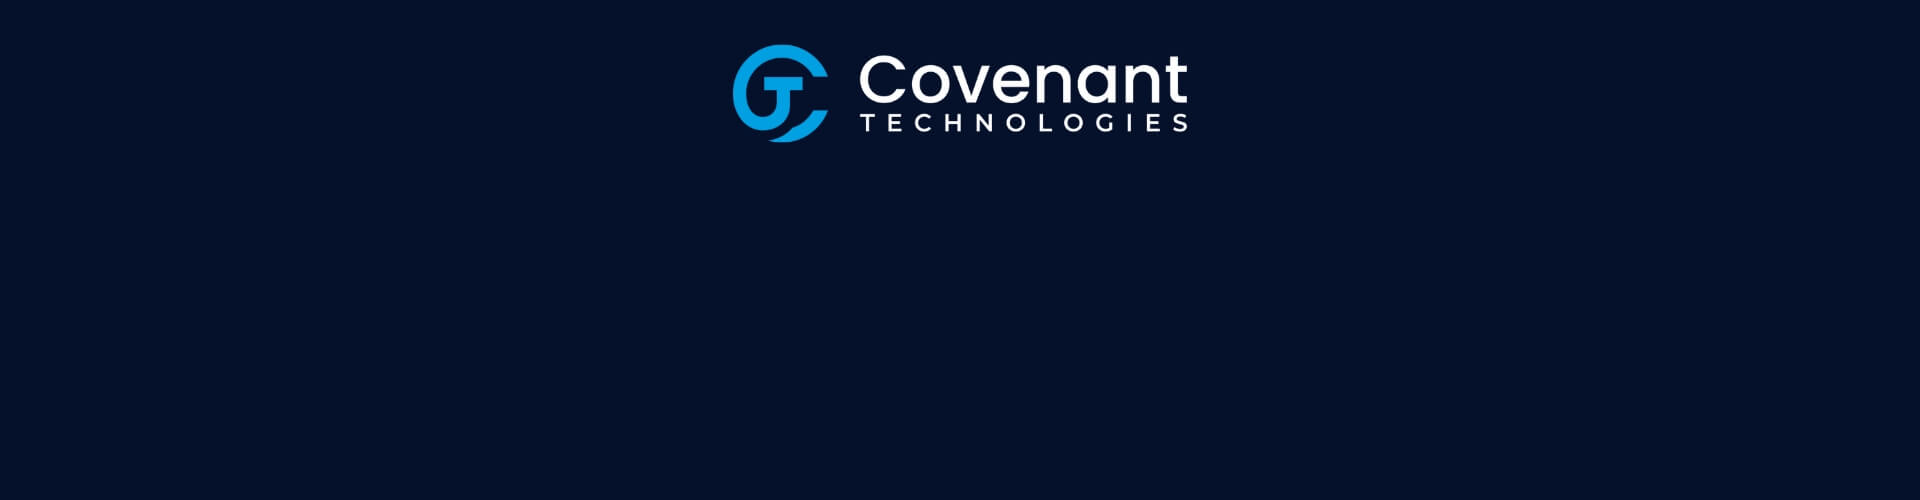 Covenant Technologies logo over a navy blue background